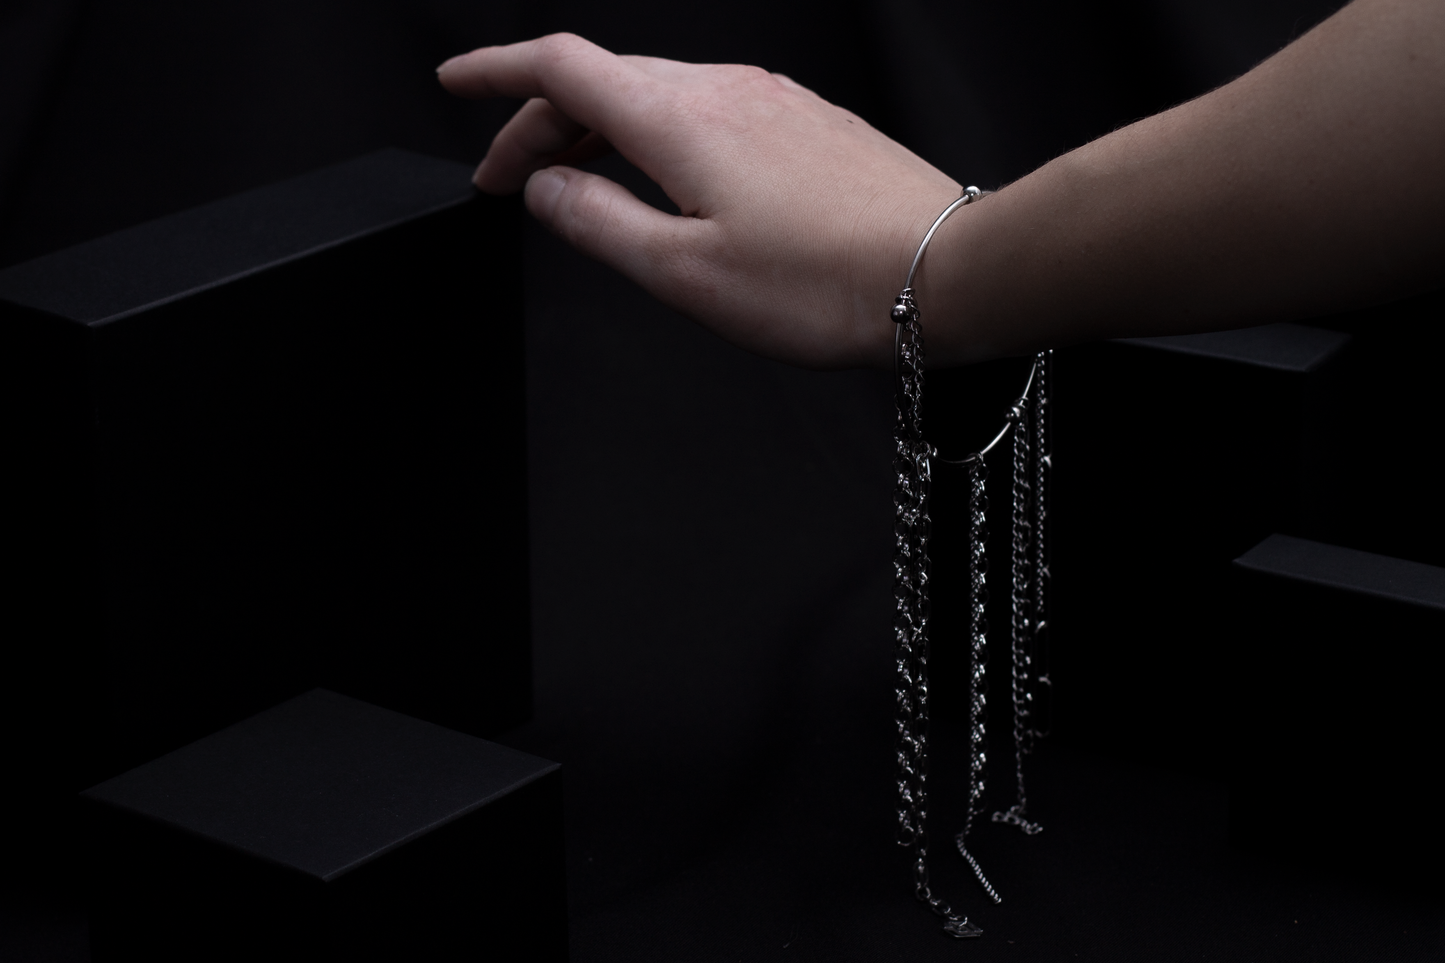 This image features a Myril Jewels rigid bracelet with multiple hanging chains, creating a striking statement piece. This bracelet reflects a neo-gothic aesthetic with its blend of elegance and edge, suitable for a variety of looks from everyday wear to more dramatic festival or Halloween ensembles.